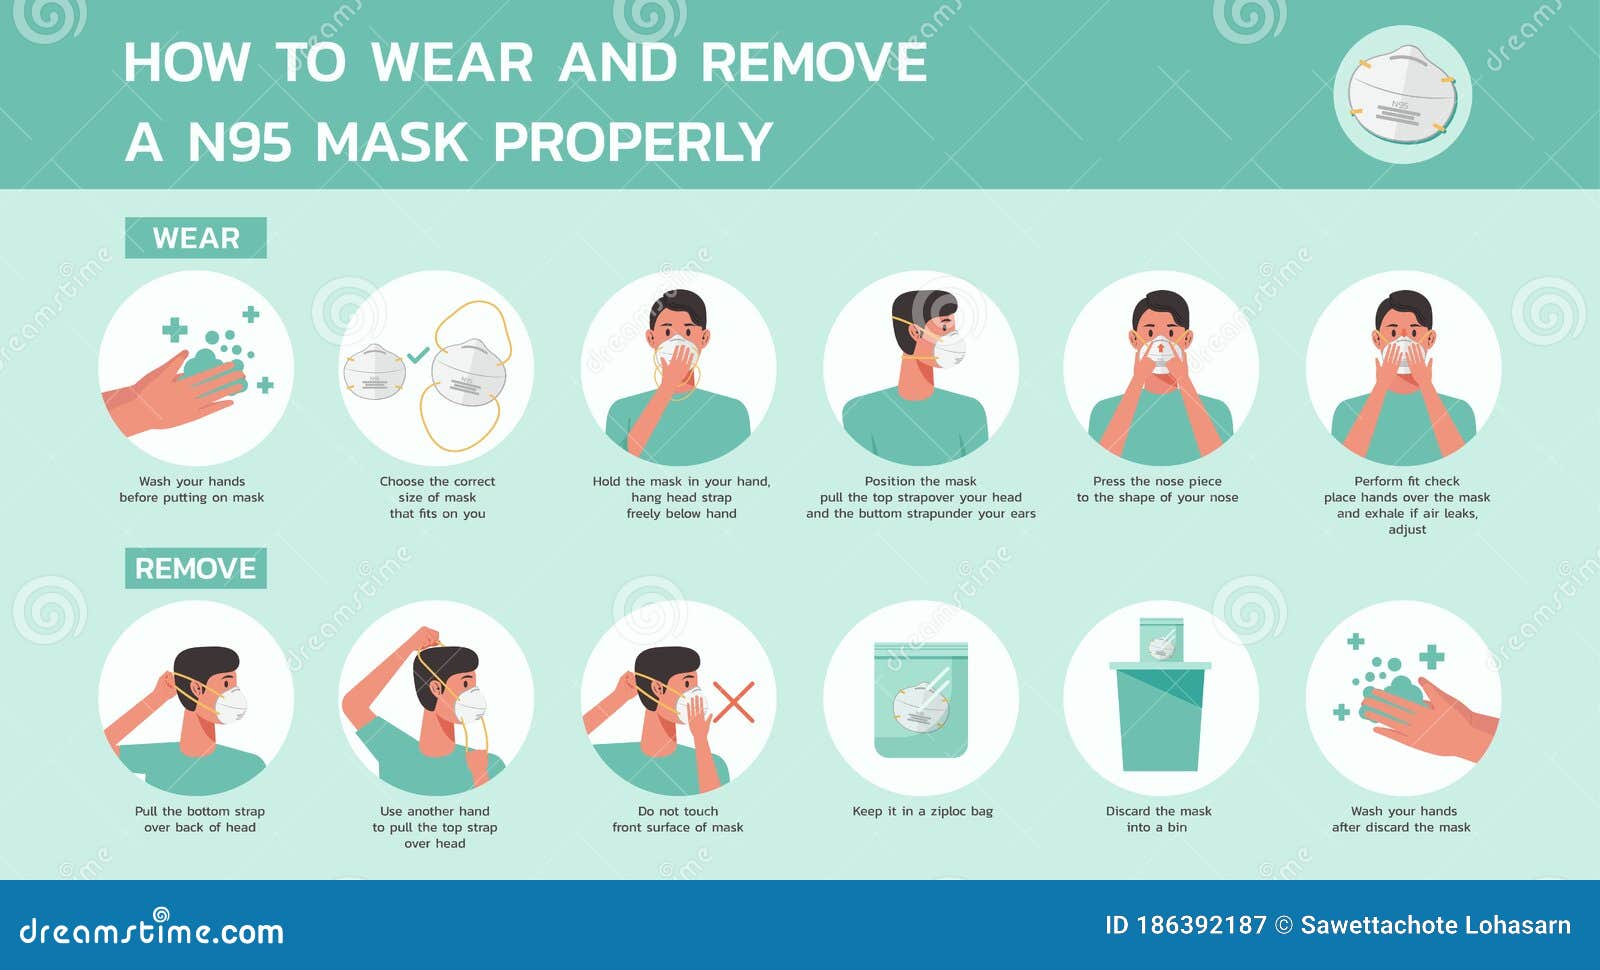 how to wear and remove a n95 mask properly infographic